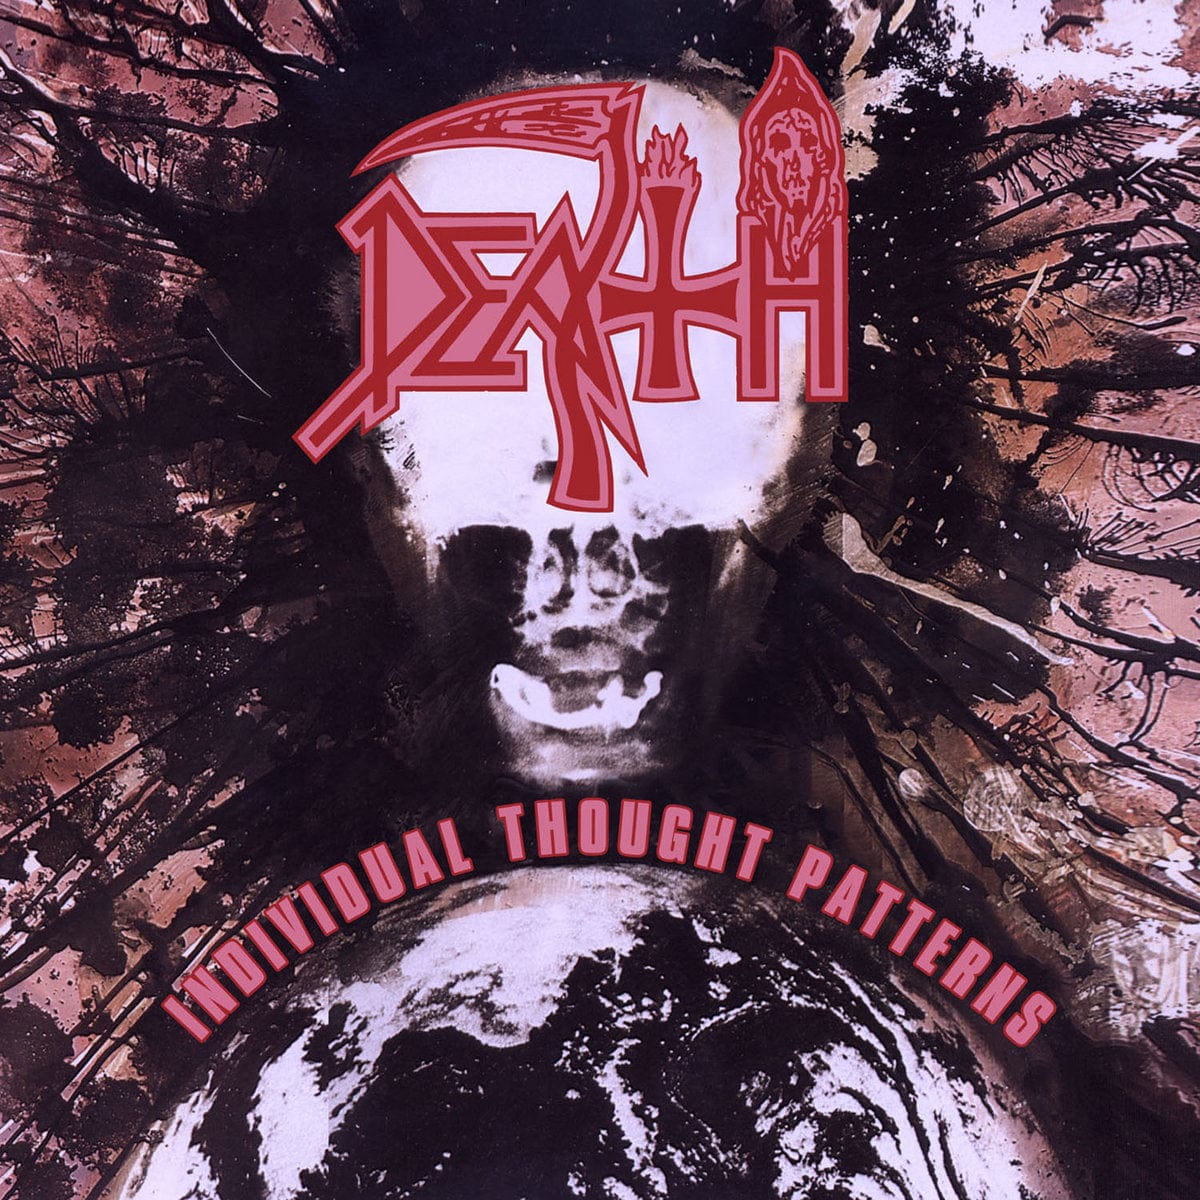 DEATH: Individual Thought Patterns LP